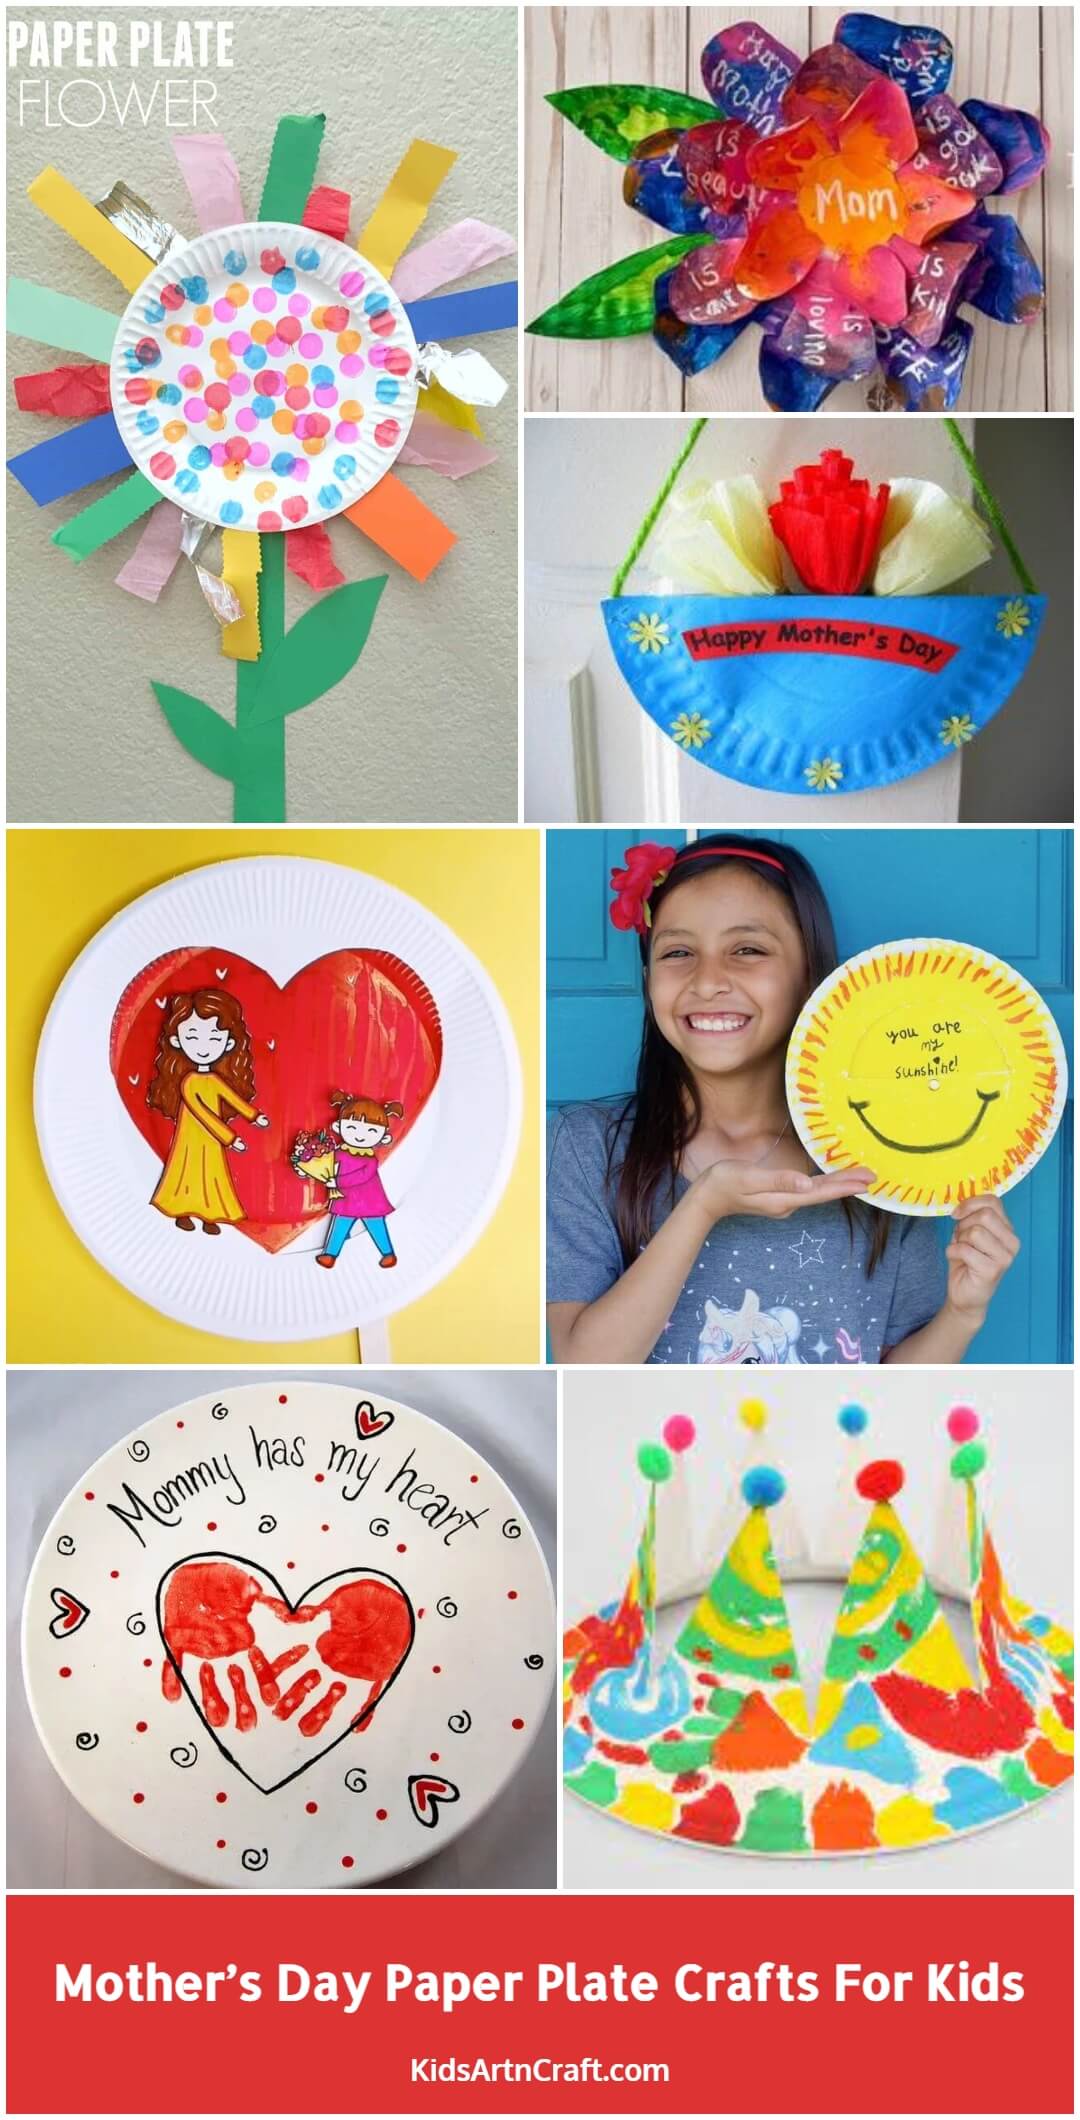 Mother’s Day Paper Plate Crafts for Kids